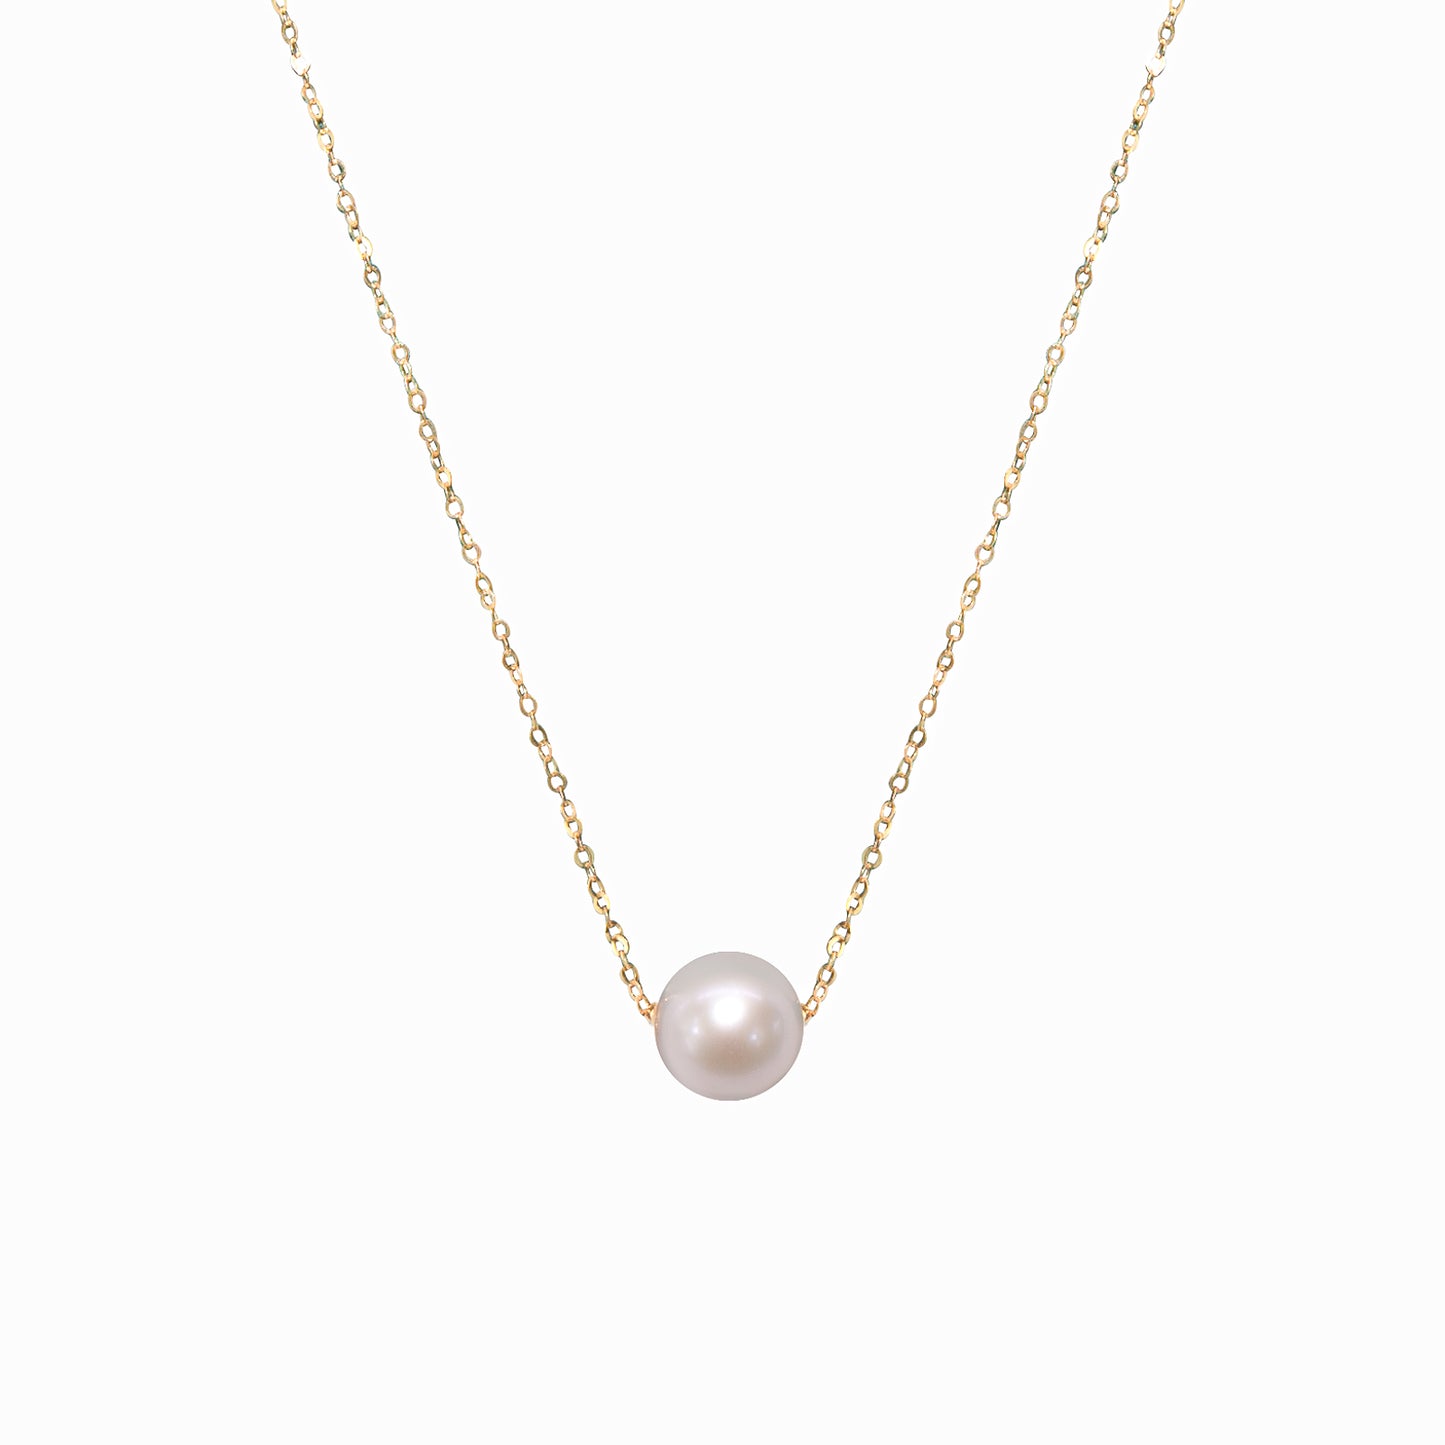 6-7 mm 18K Gold Pearl Necklace